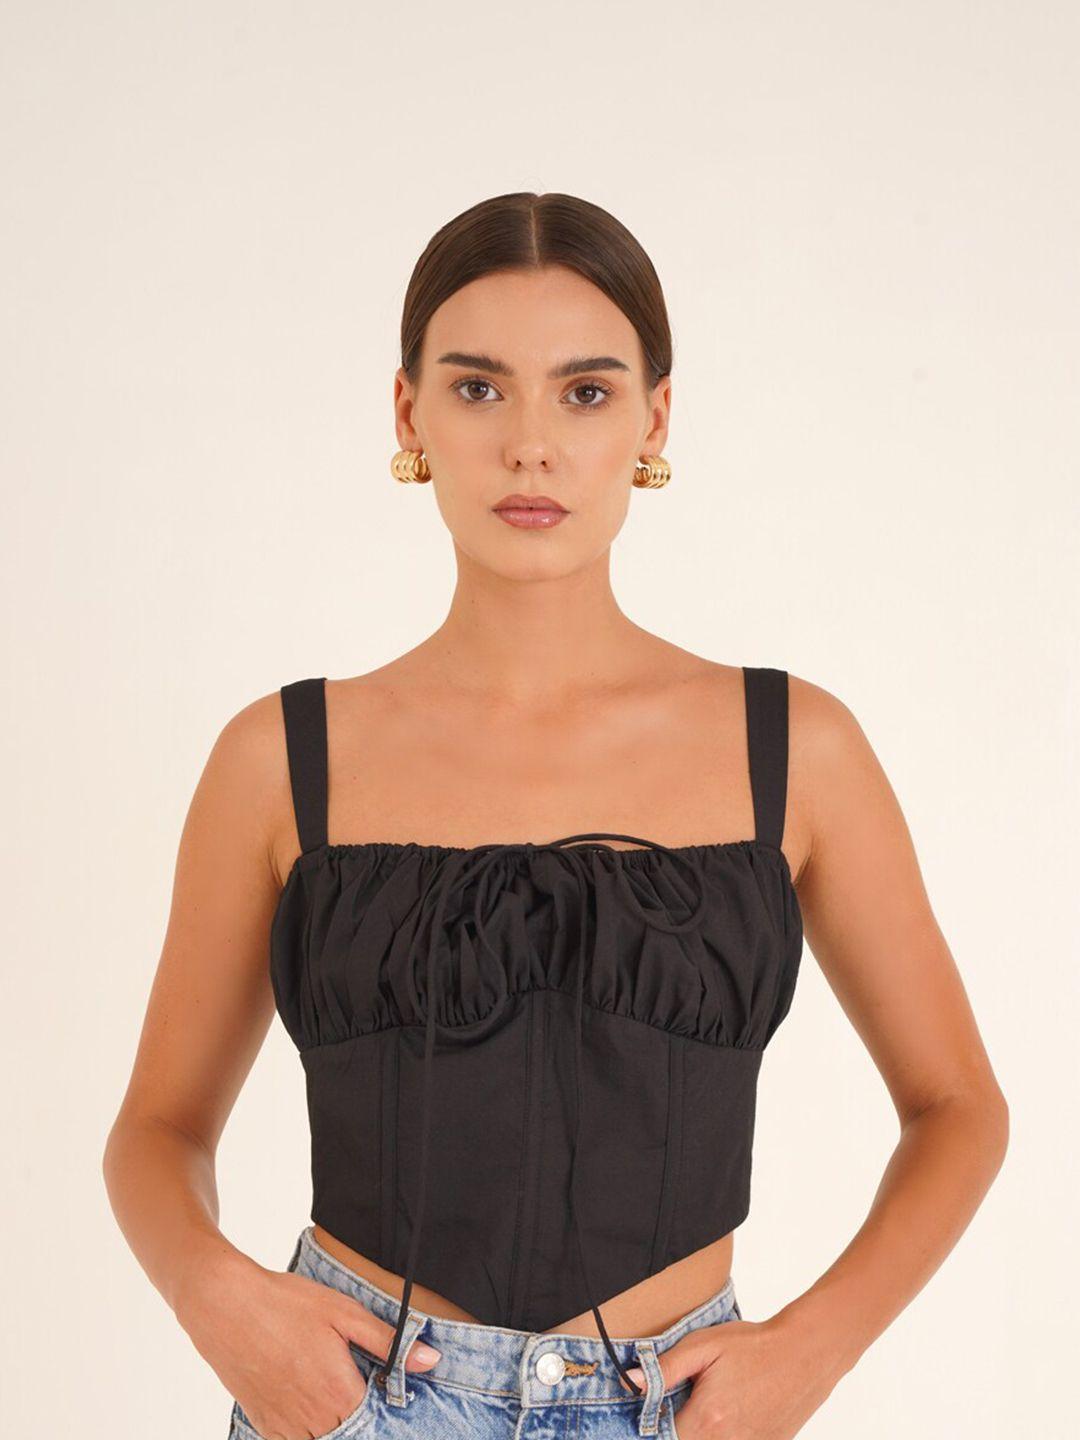 ipso facto shoulder strap cotton crop fitted top